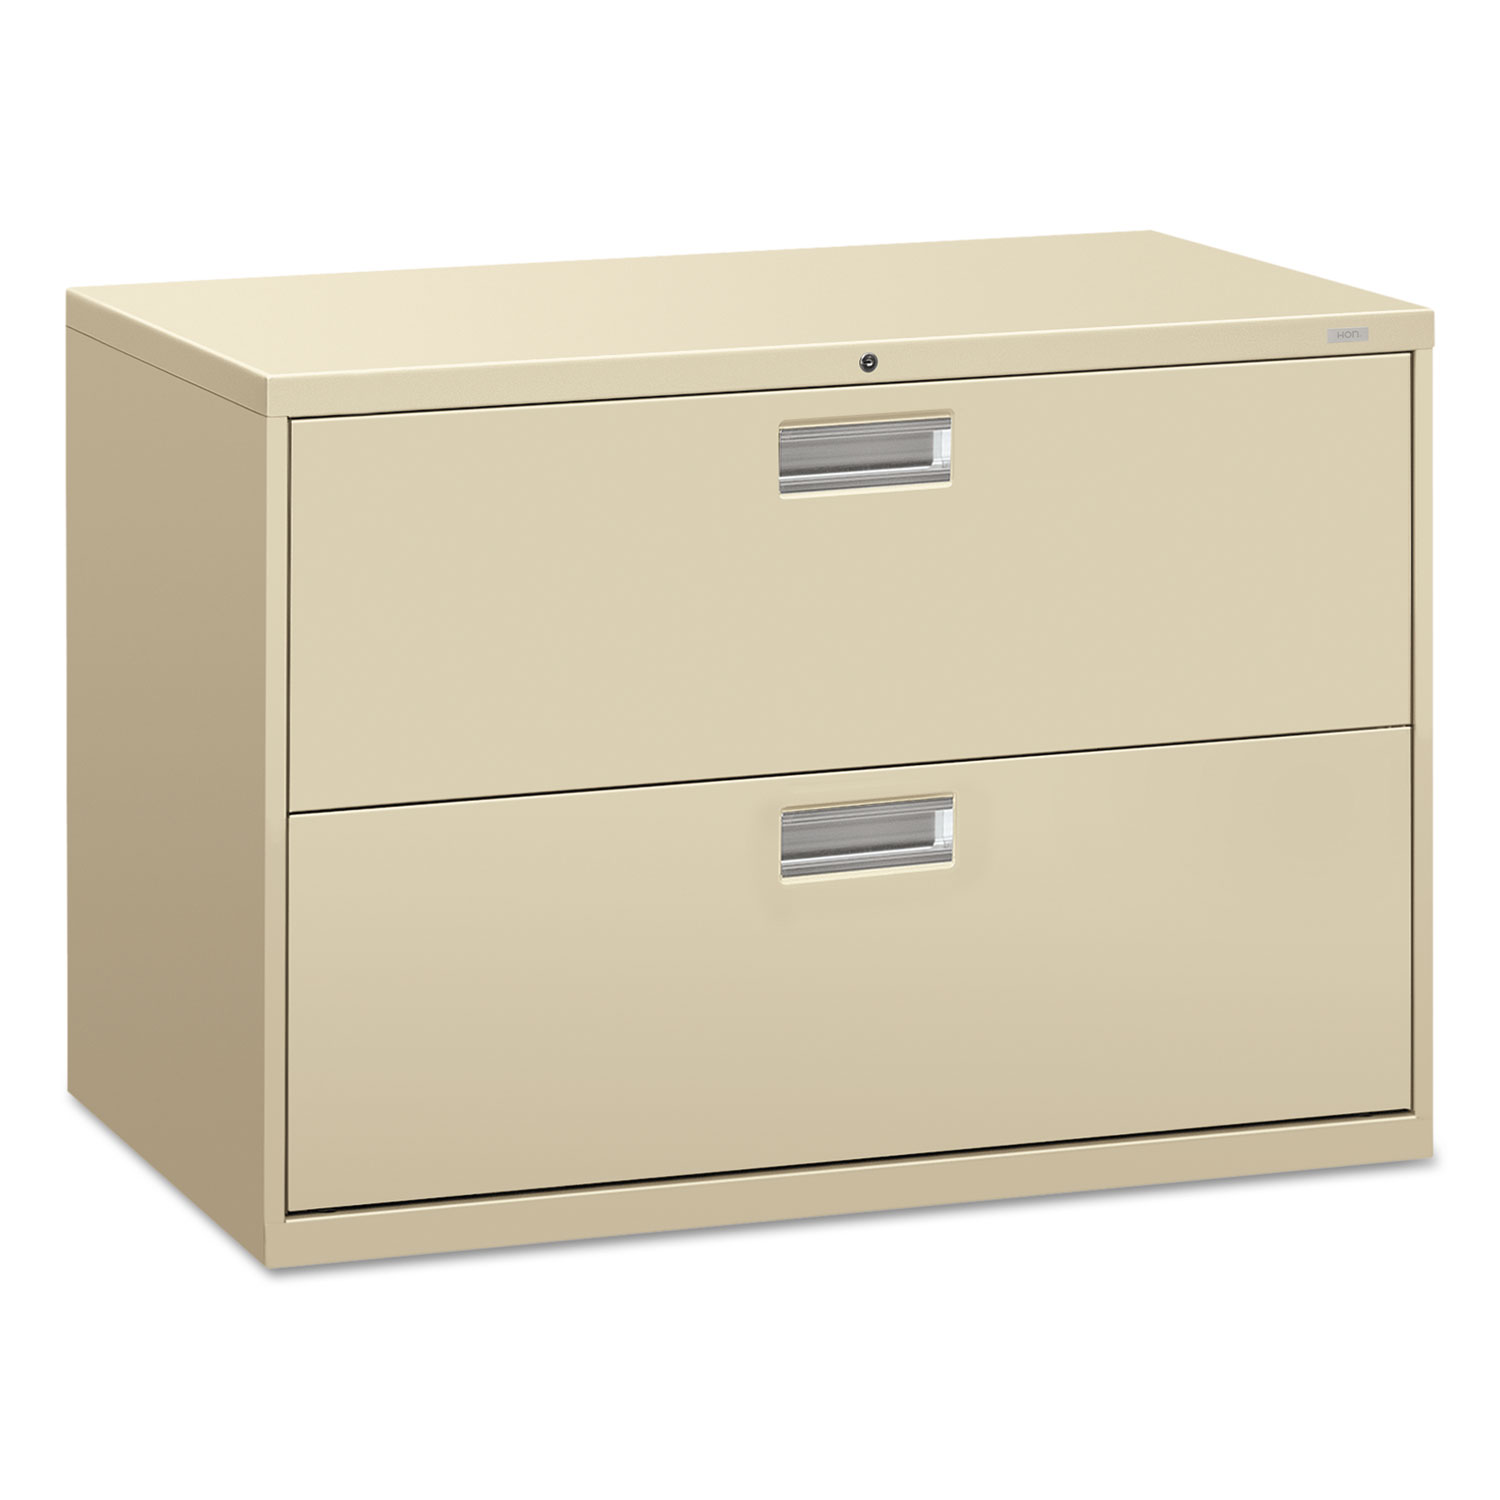 HON 600 Series Two-Drawer Lateral File, 42w x 19-1/4d, Putty